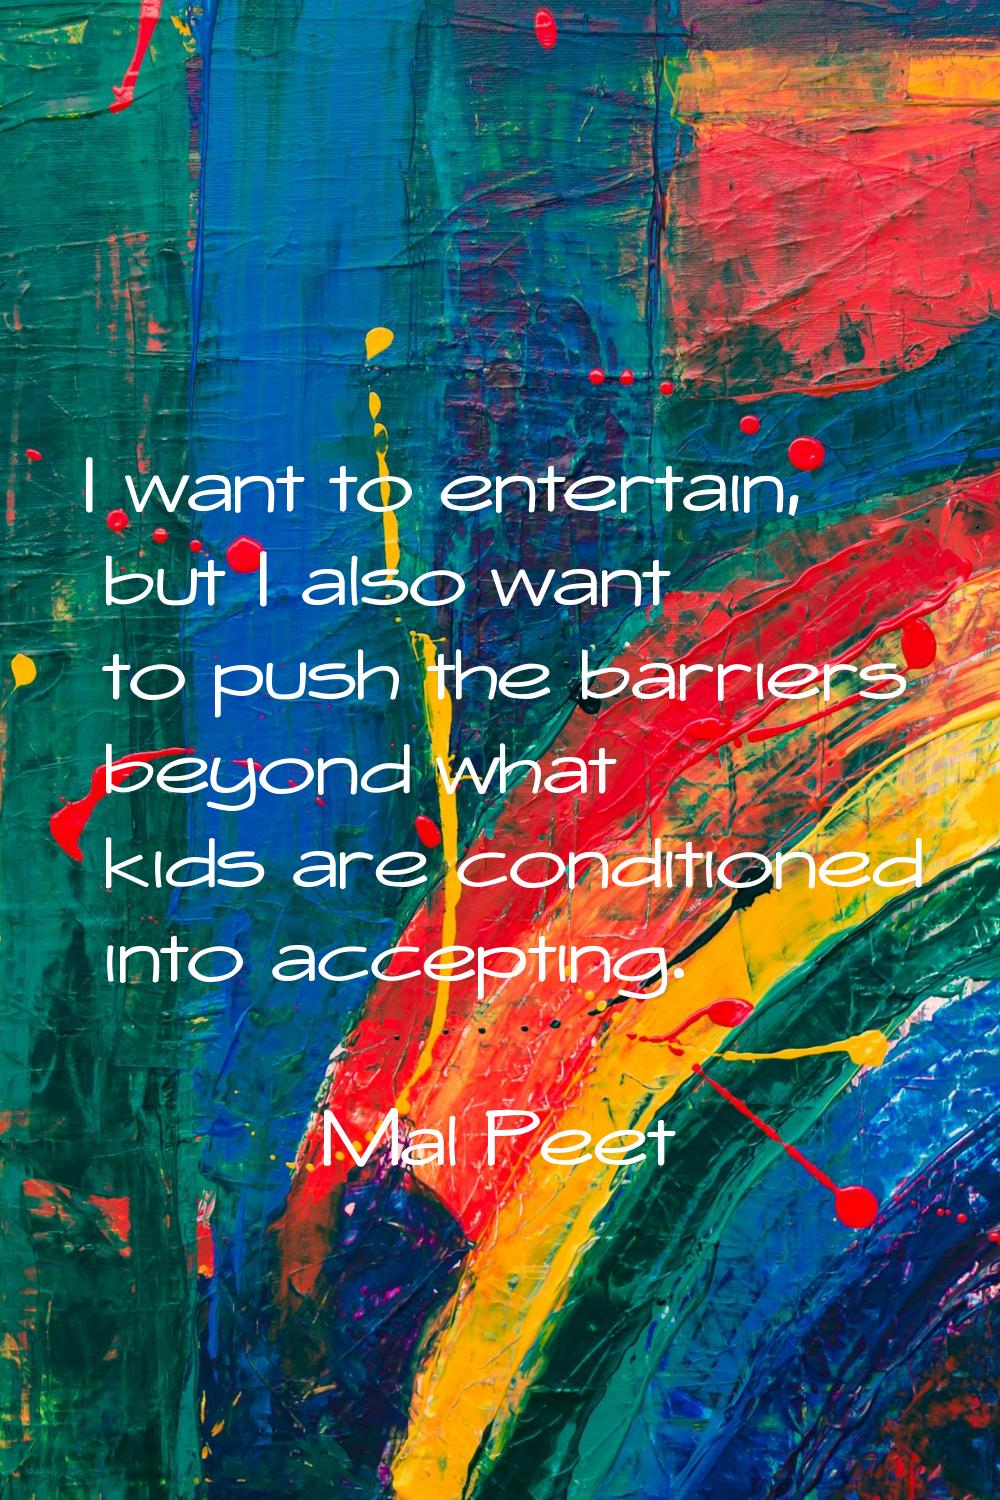 I want to entertain, but I also want to push the barriers beyond what kids are conditioned into acc